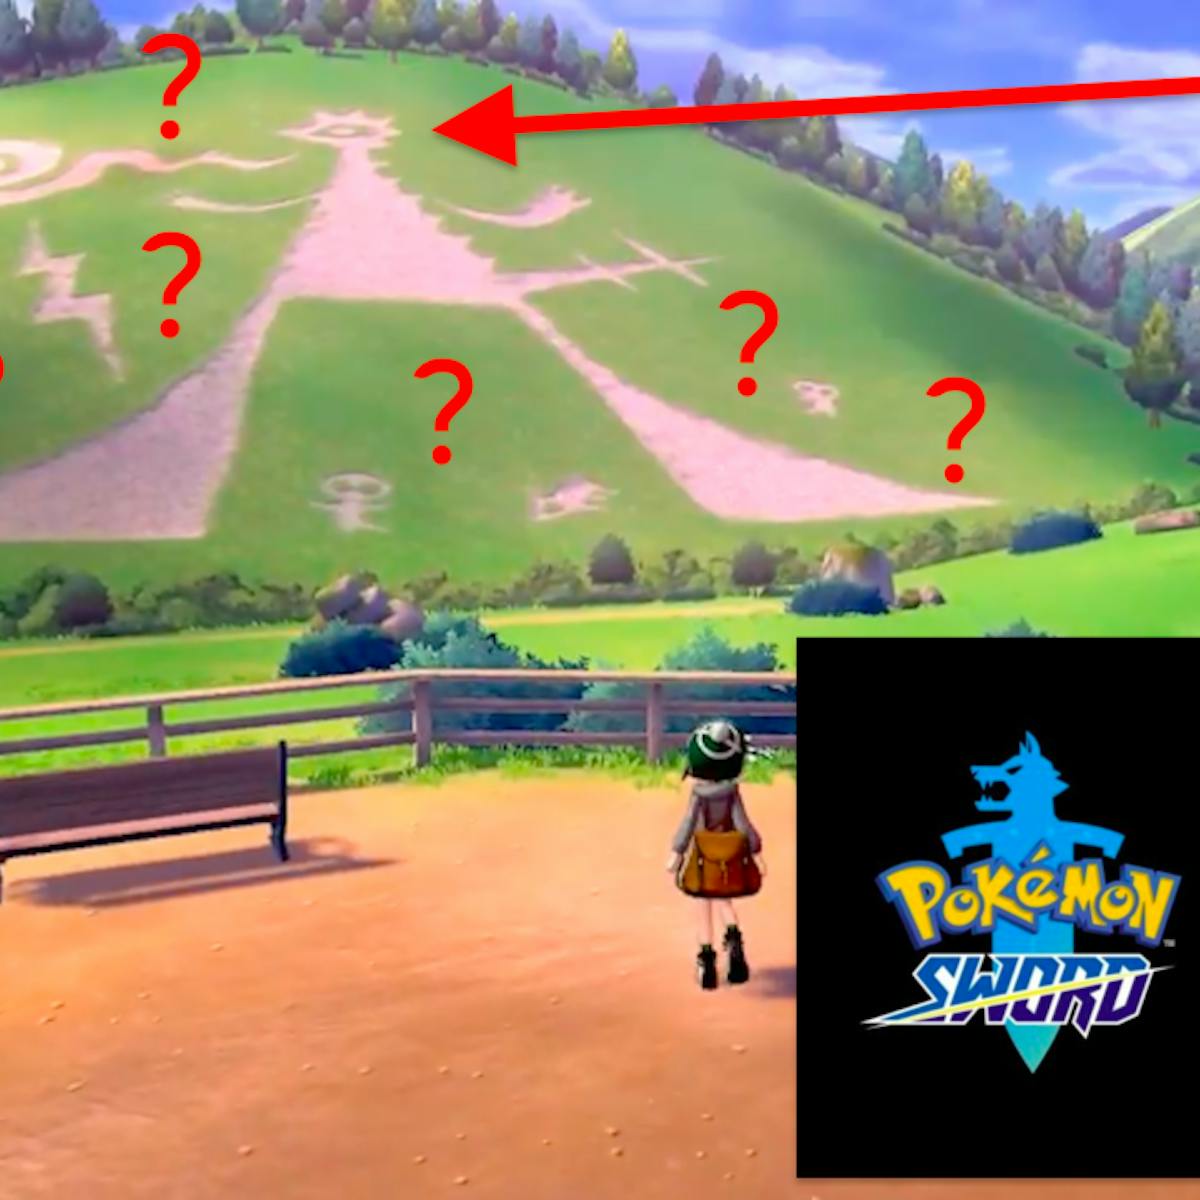 Pokémon Sword And Shield Legendary Might Be Revealed In The